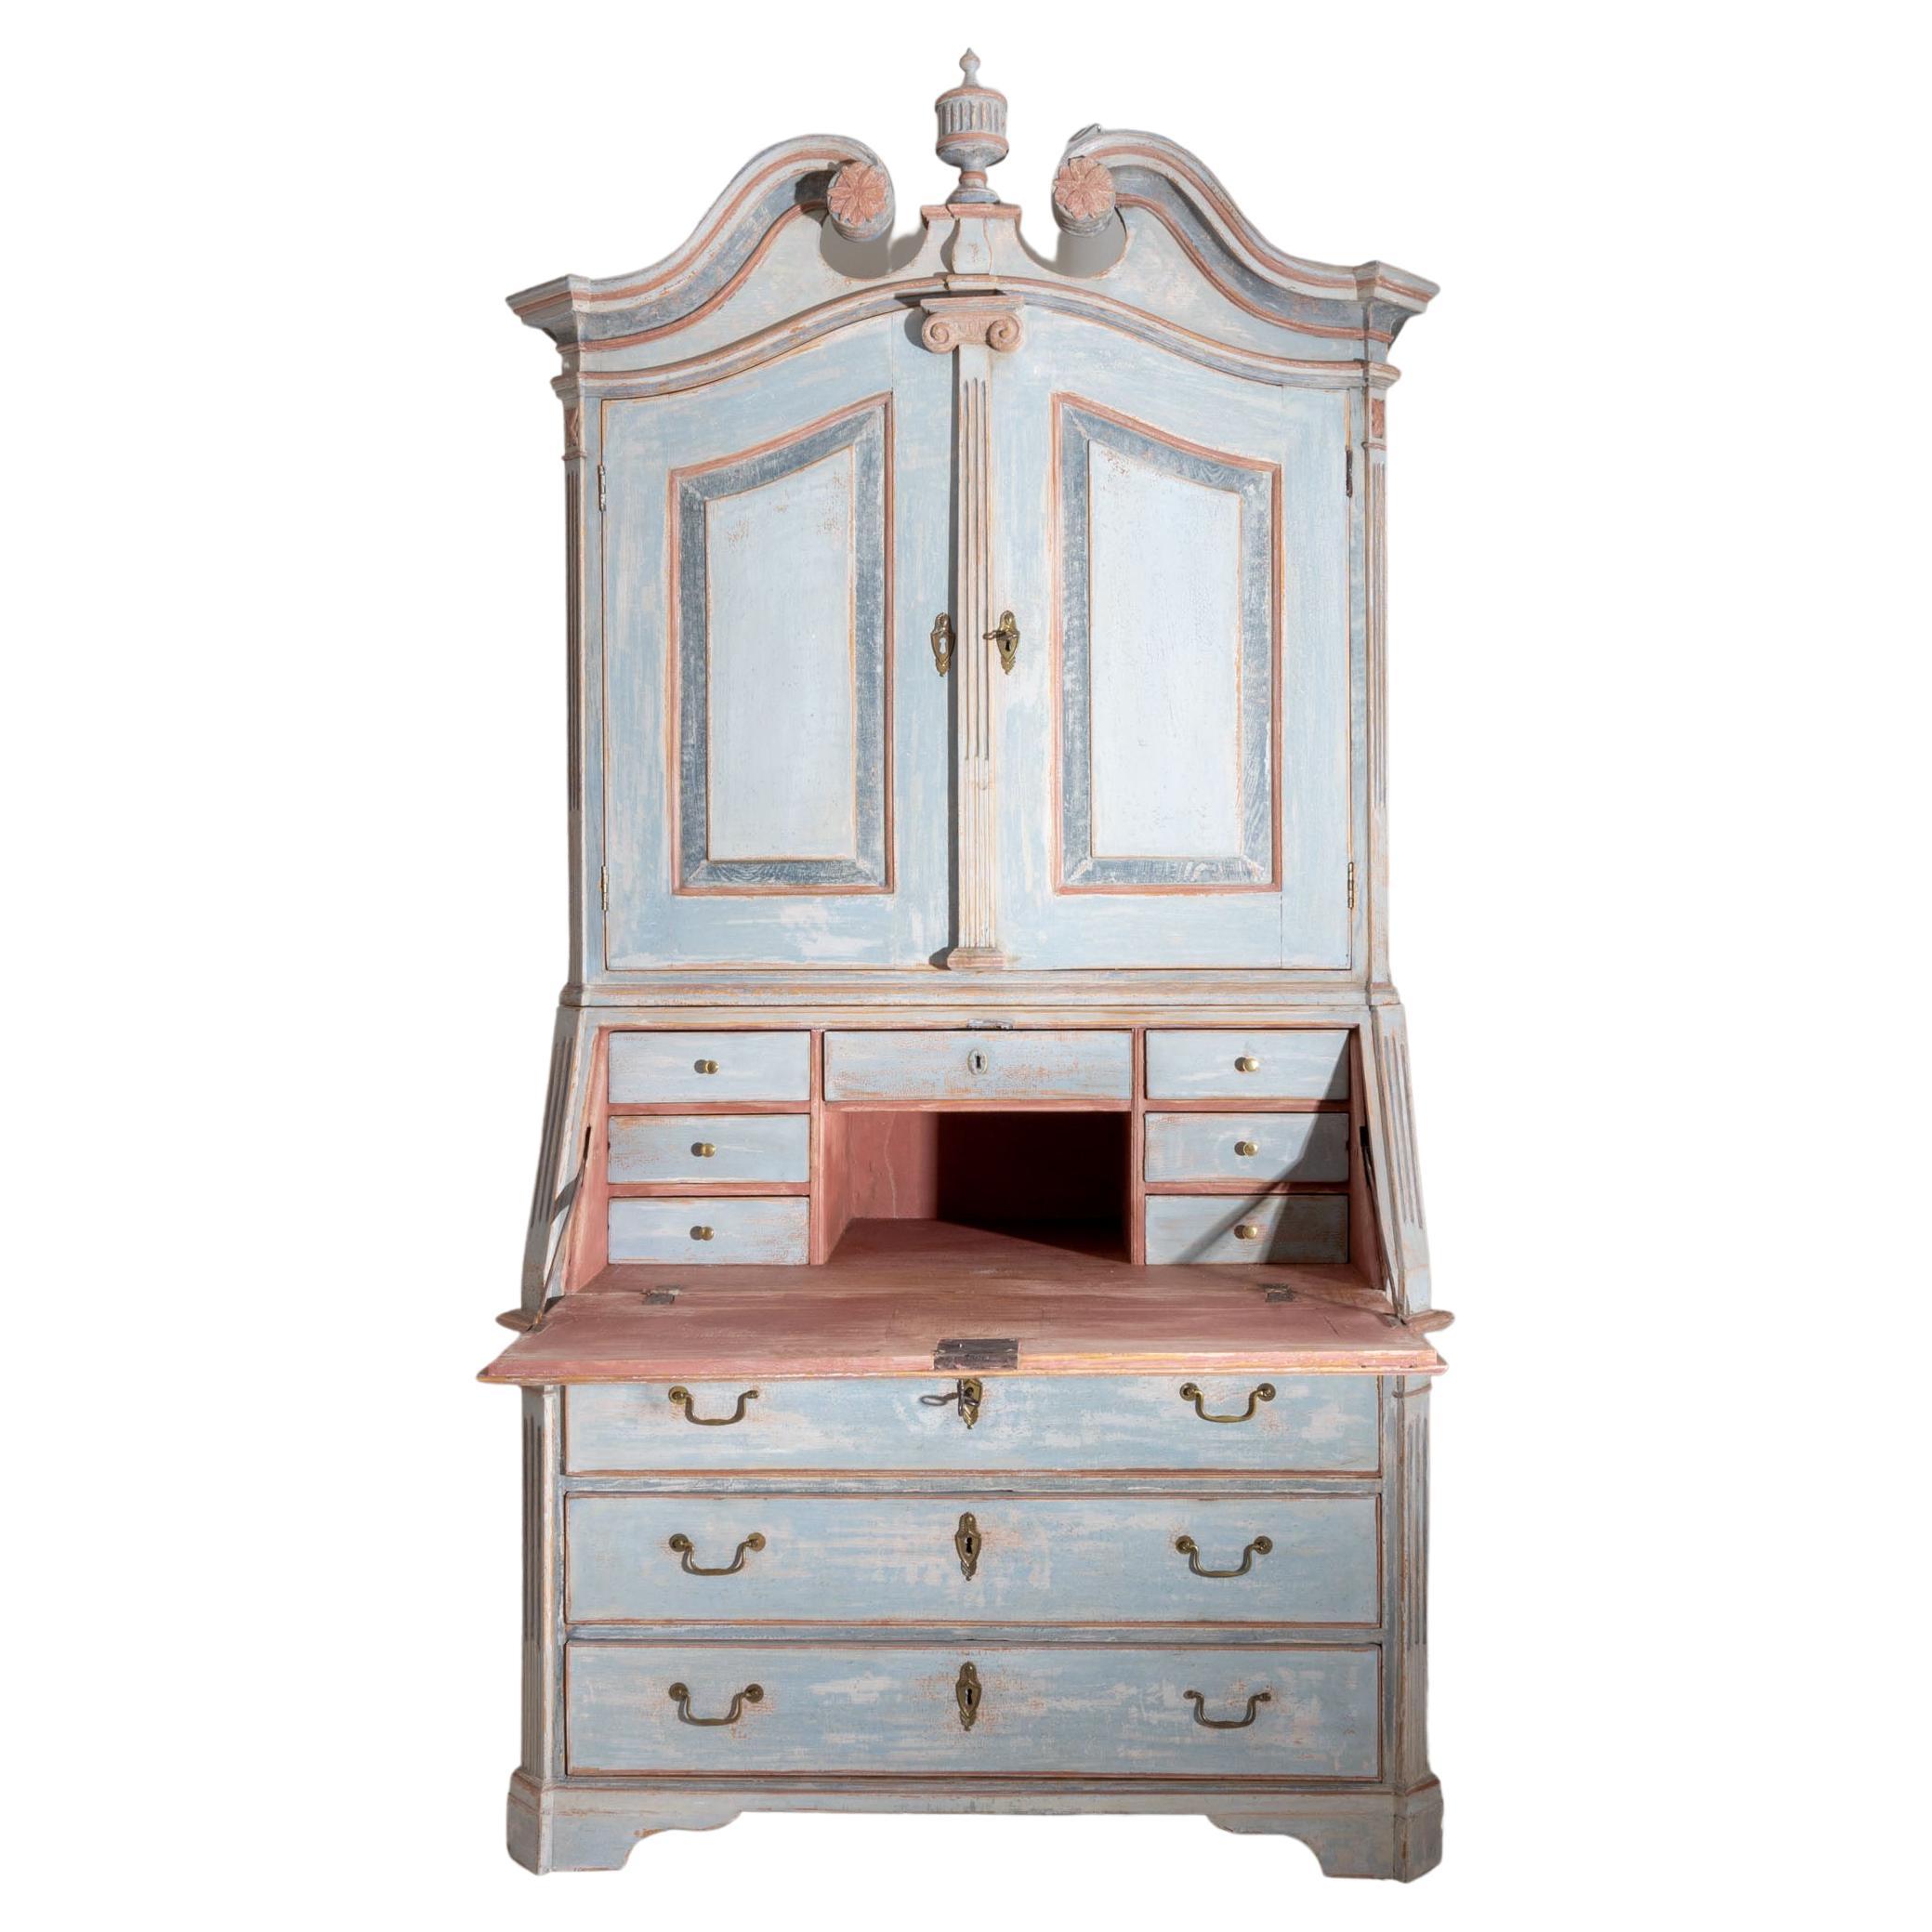 German Hand Painted Gustavian-Style Secretaire in Blue and Red, 18th Century